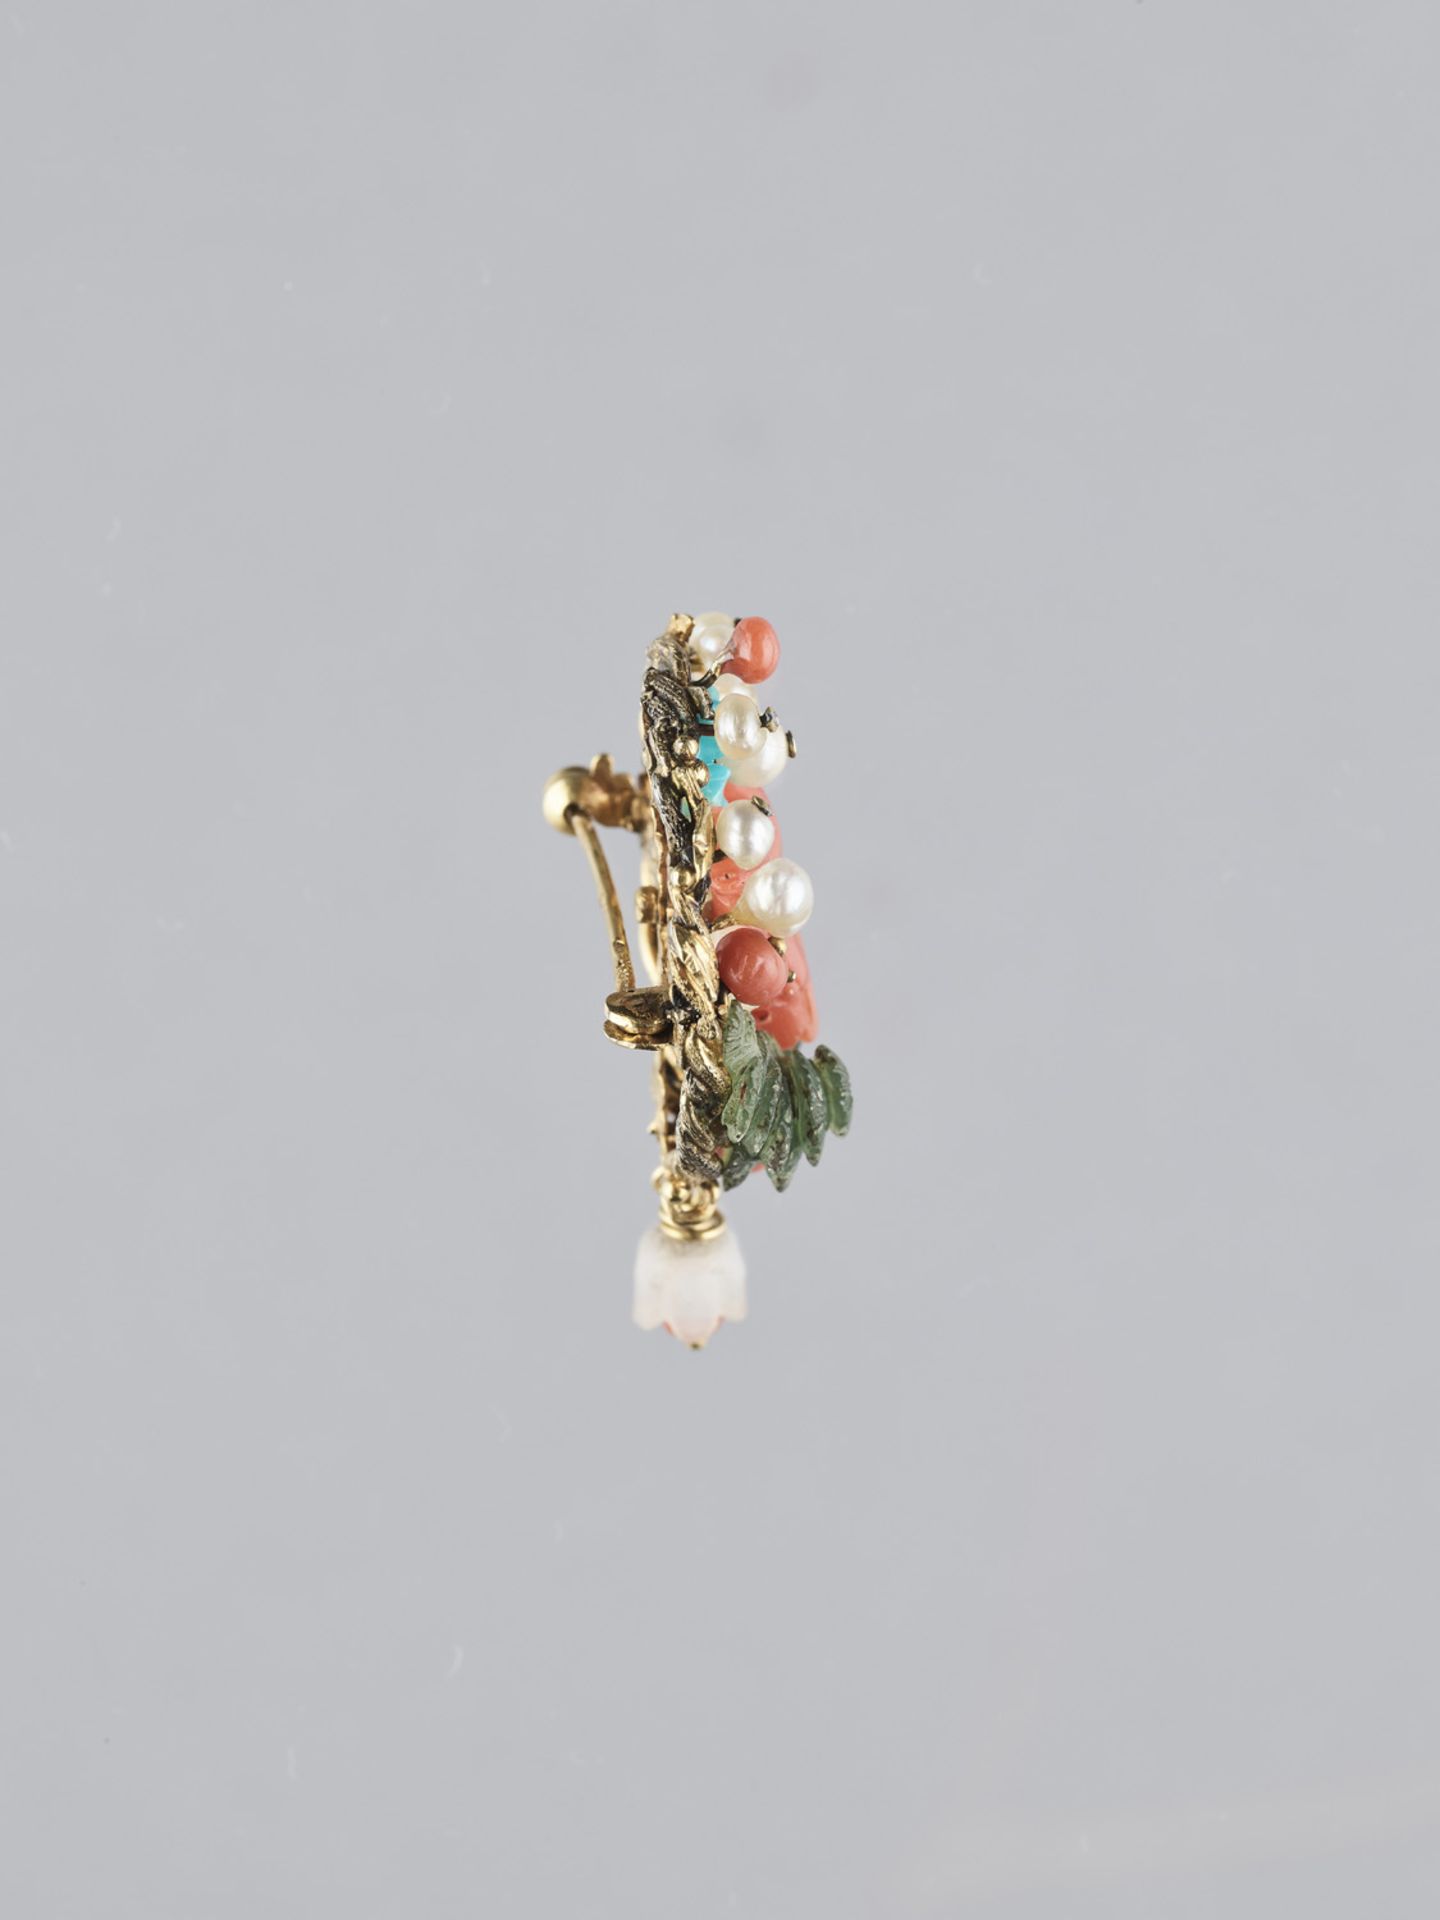 A 14K YELLOW GOLD, CORAL AND JADE ‘DEER’S HEAD’ BROOCH, c. 1900-1930 - Image 2 of 2